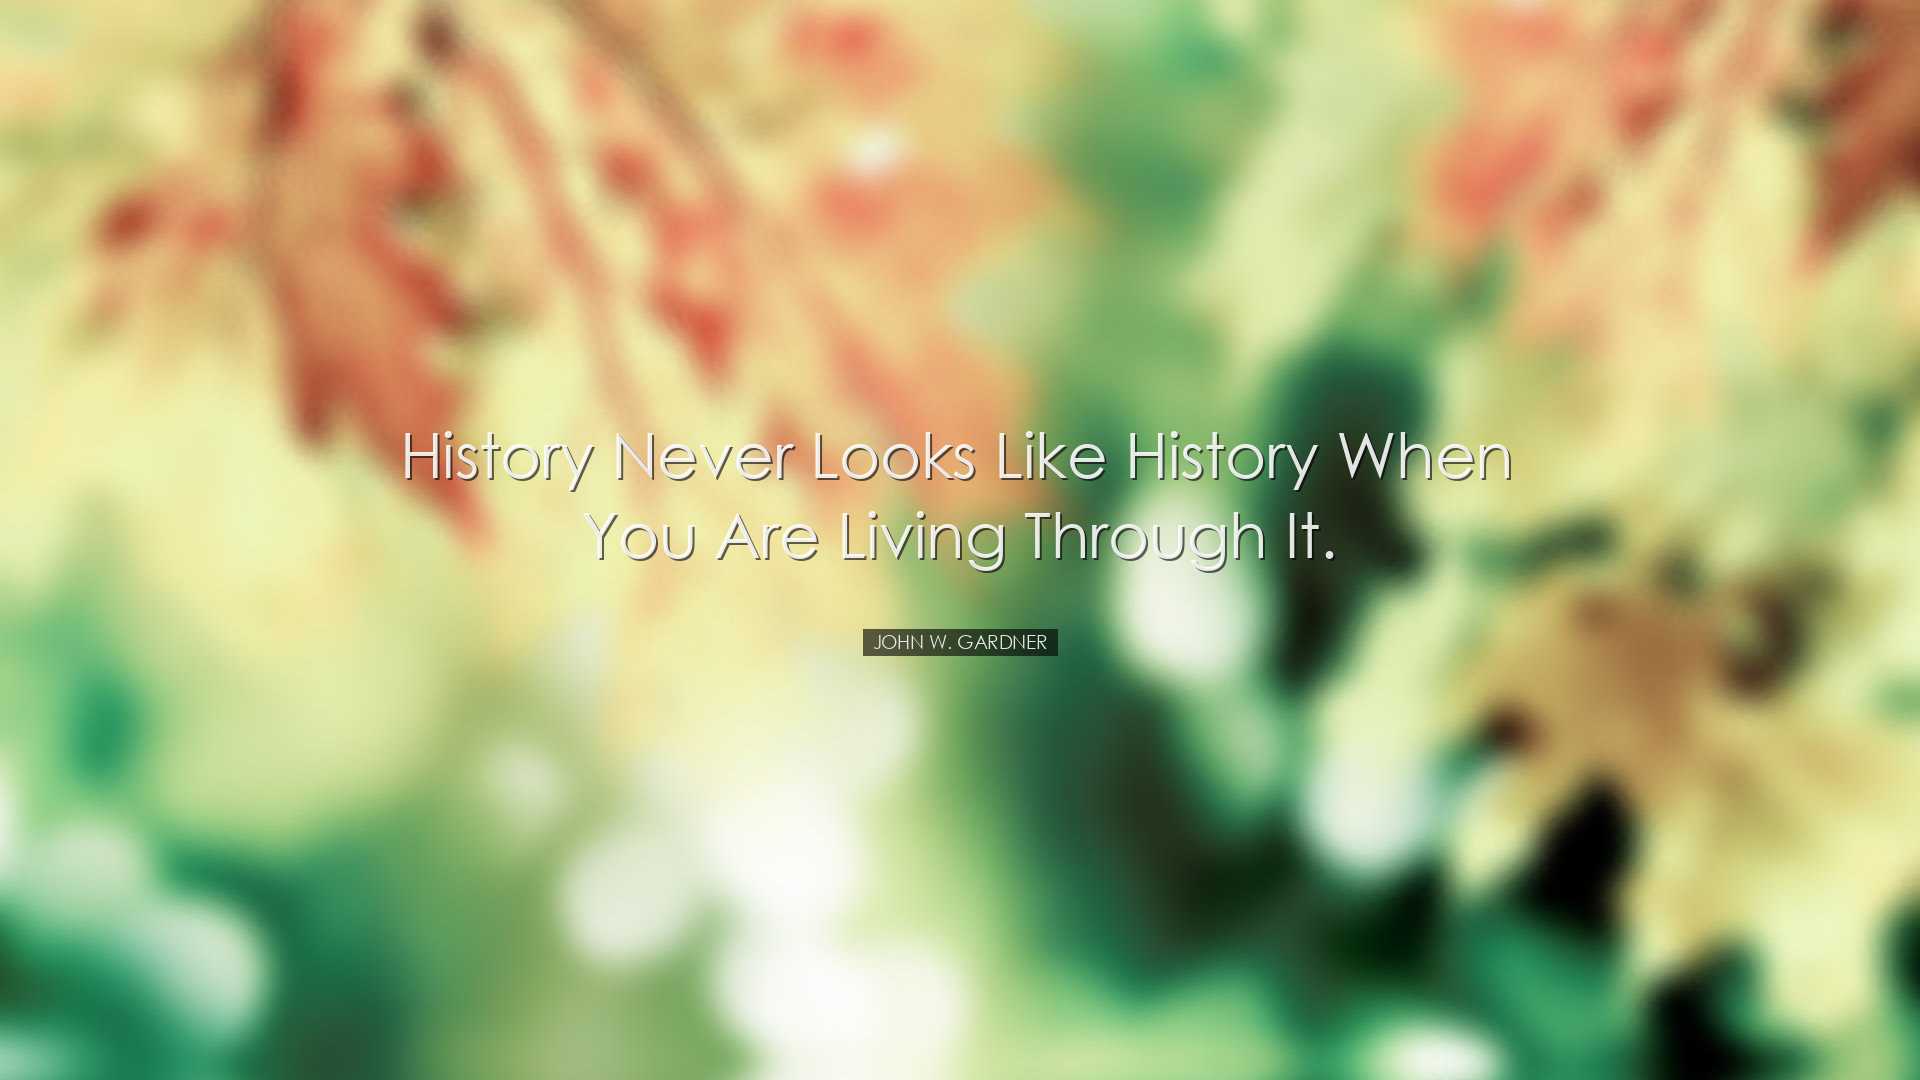 History never looks like history when you are living through it. -